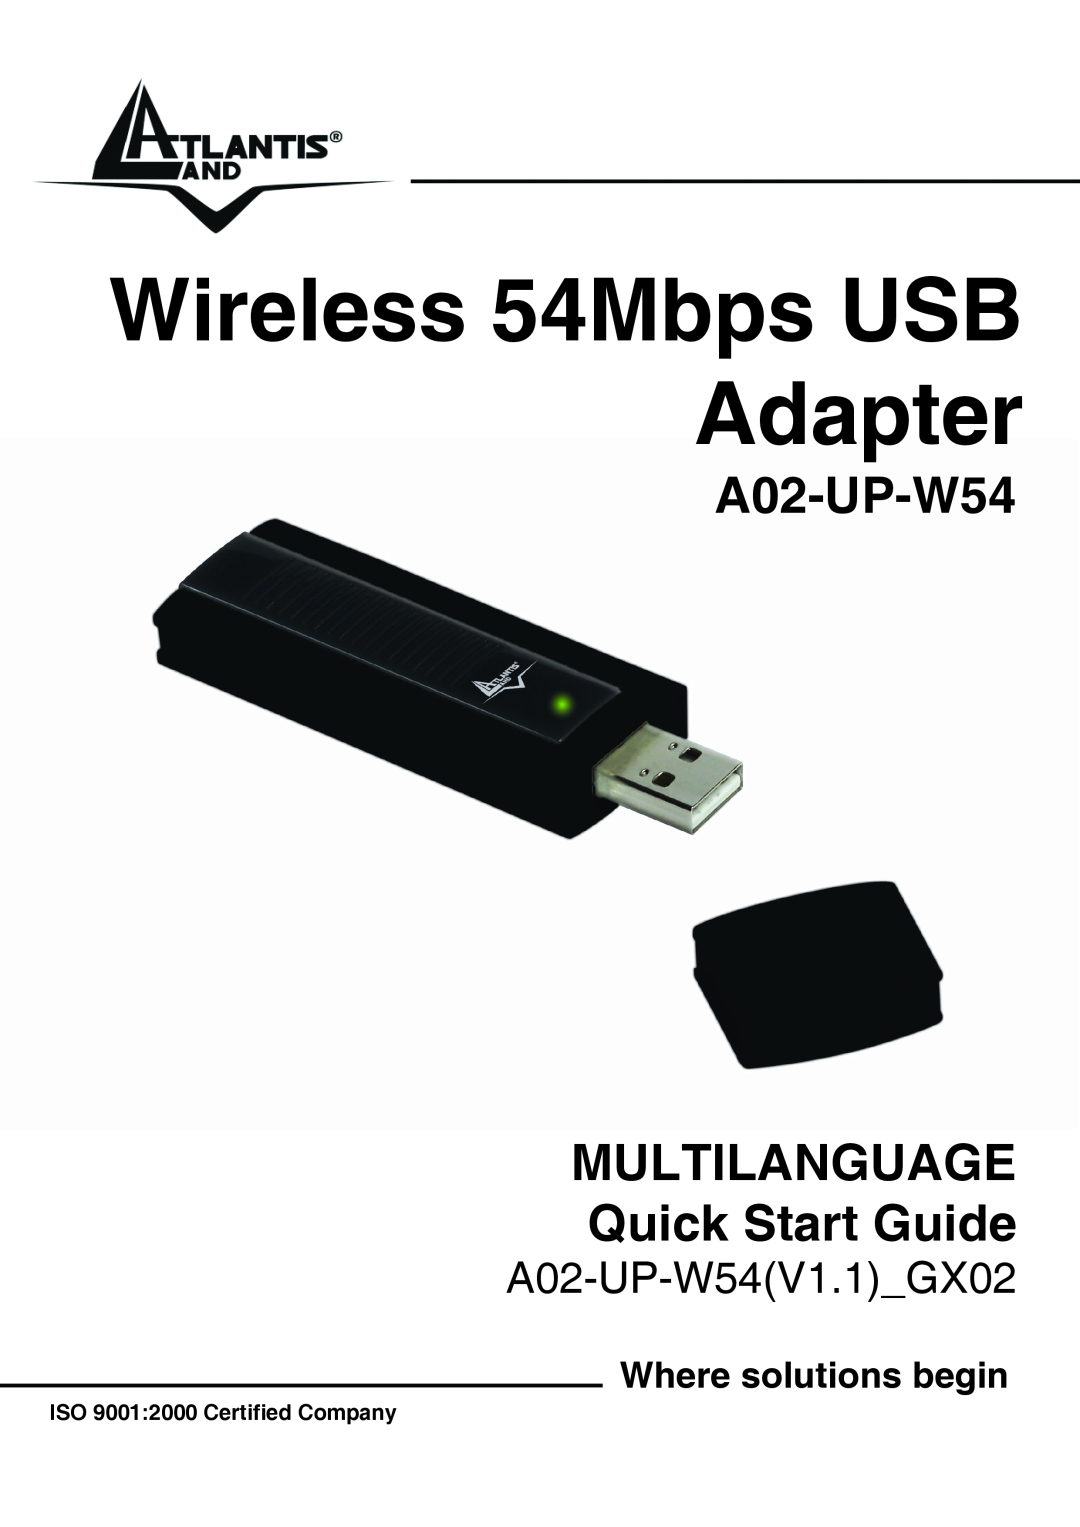 Atlantis Land quick start Where solutions begin, Wireless 54Mbps USB Adapter, A02-UP-W54V1.1GX02 